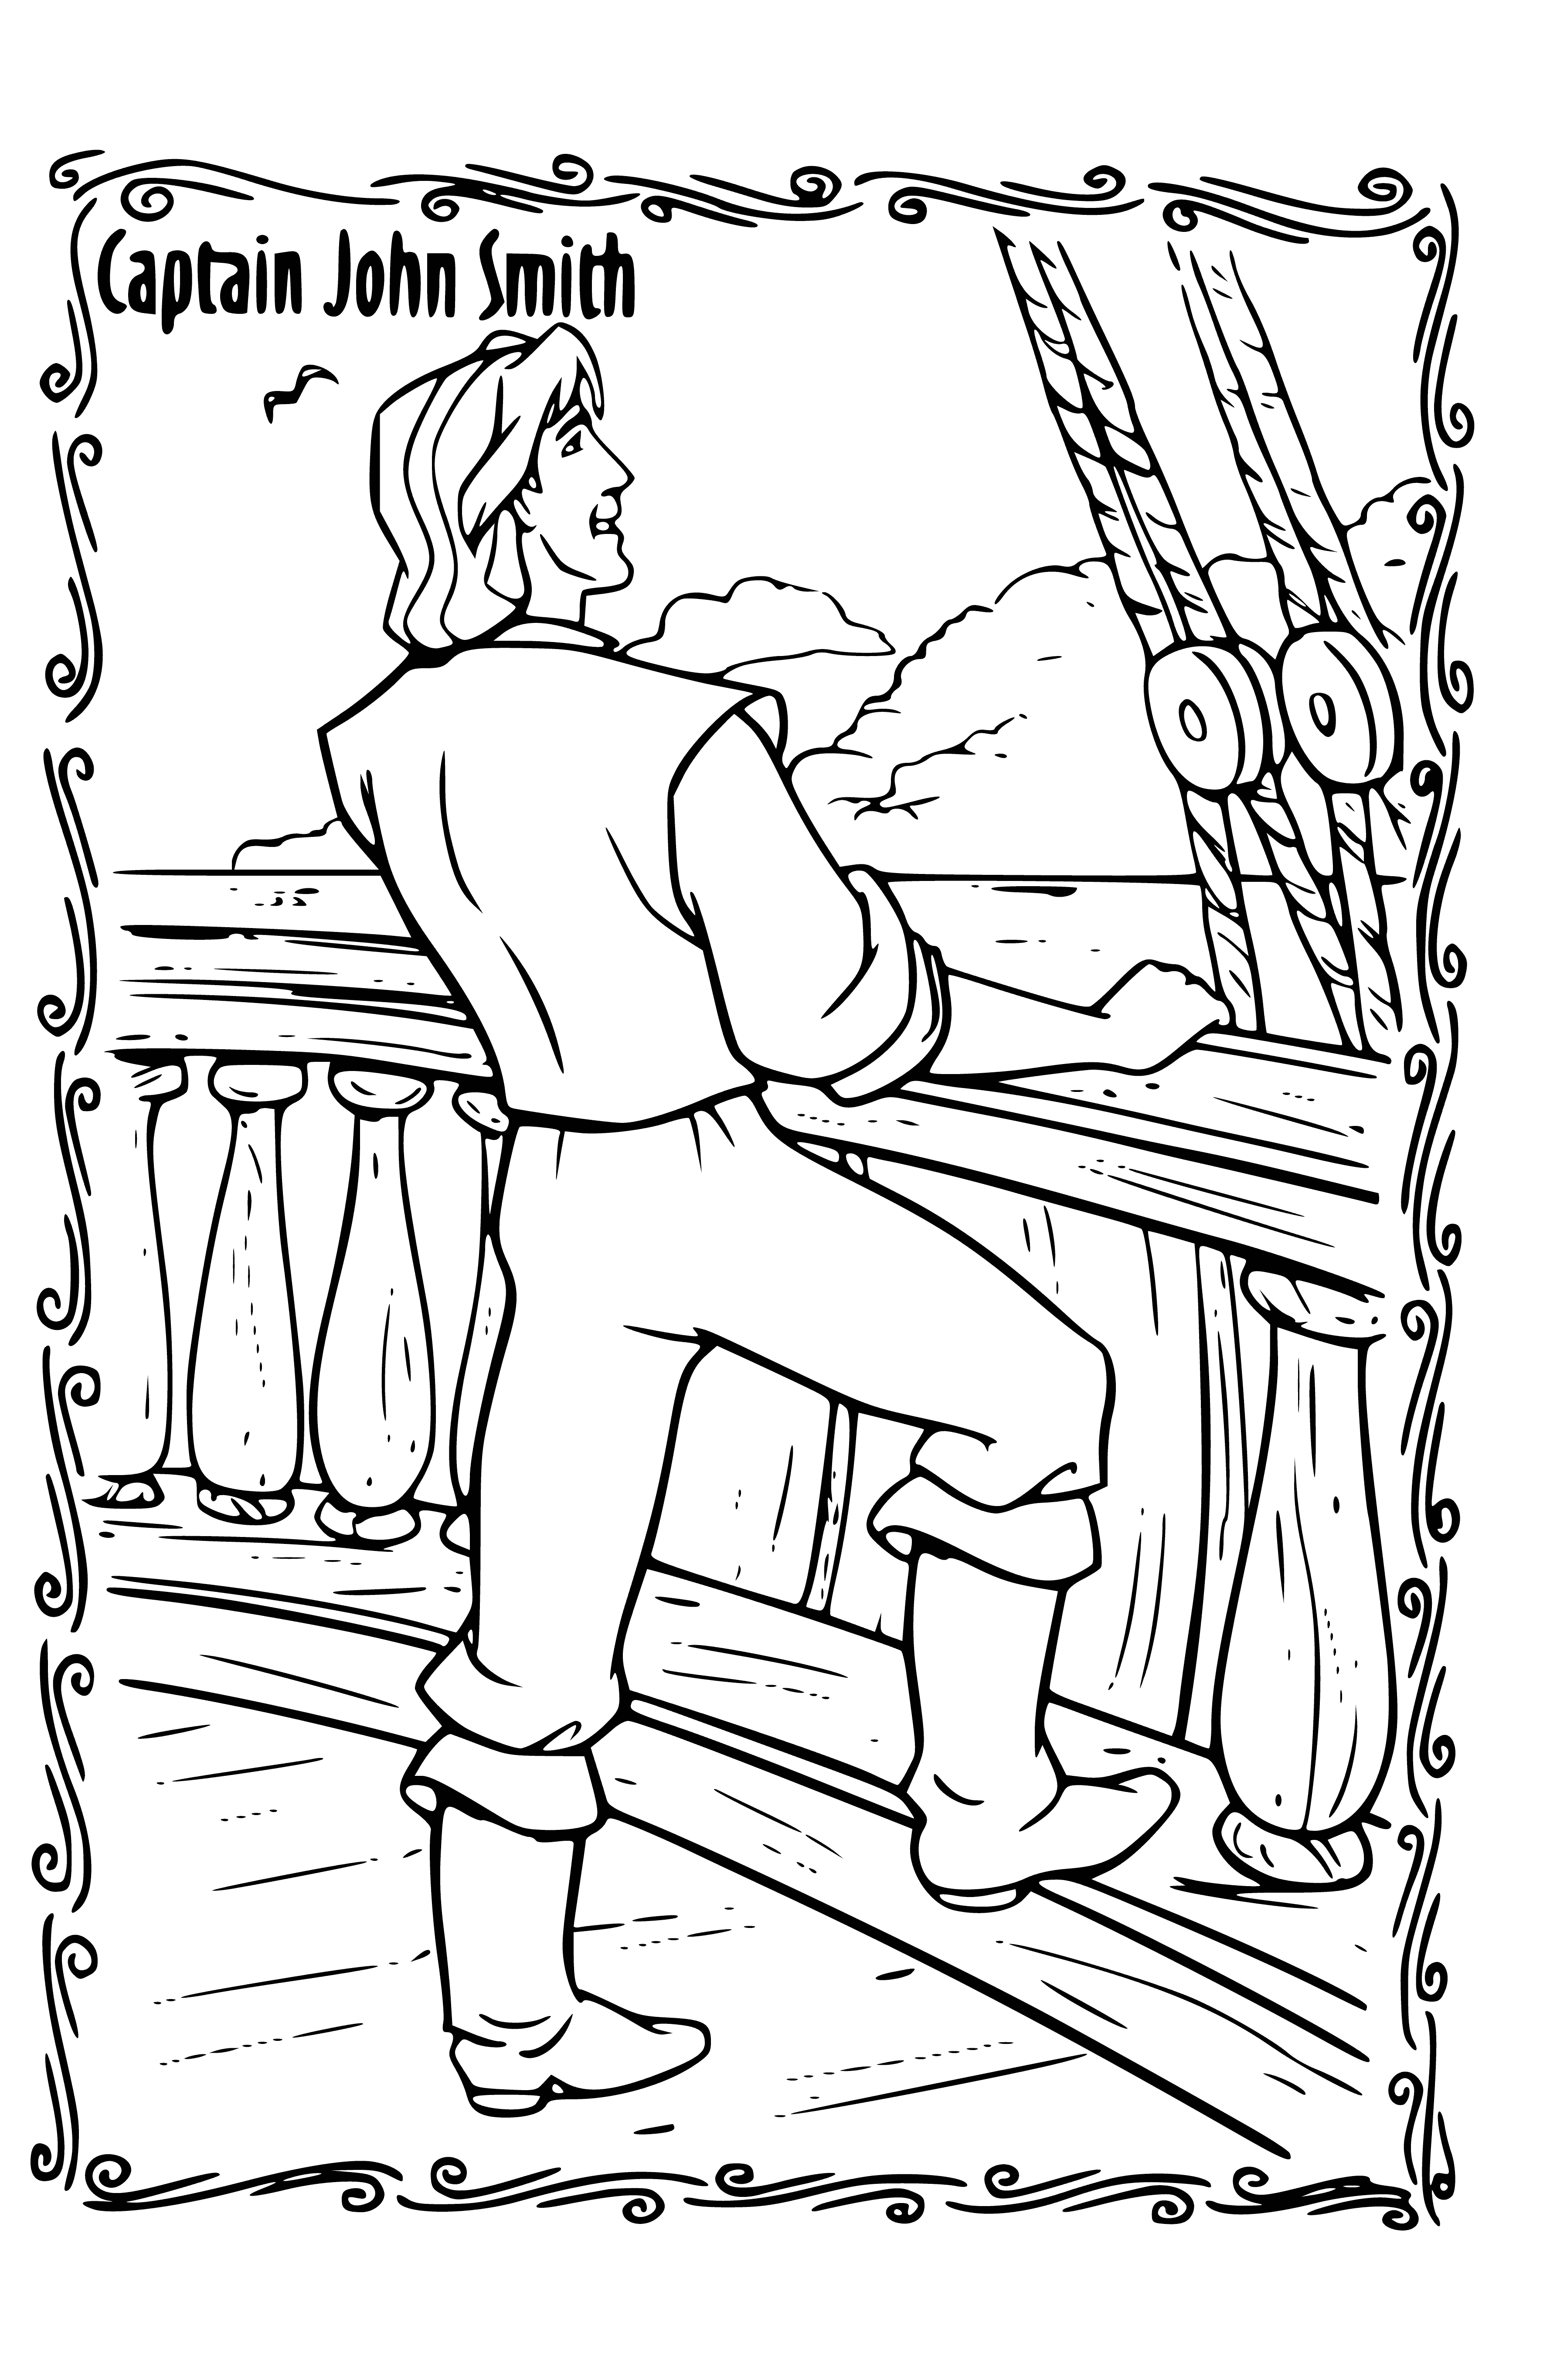 coloring page: Pocahontas and John Smith face each other: she wears jewelry and a dress, he wears metal armor. Both have serious expressions as they look intently at each other.